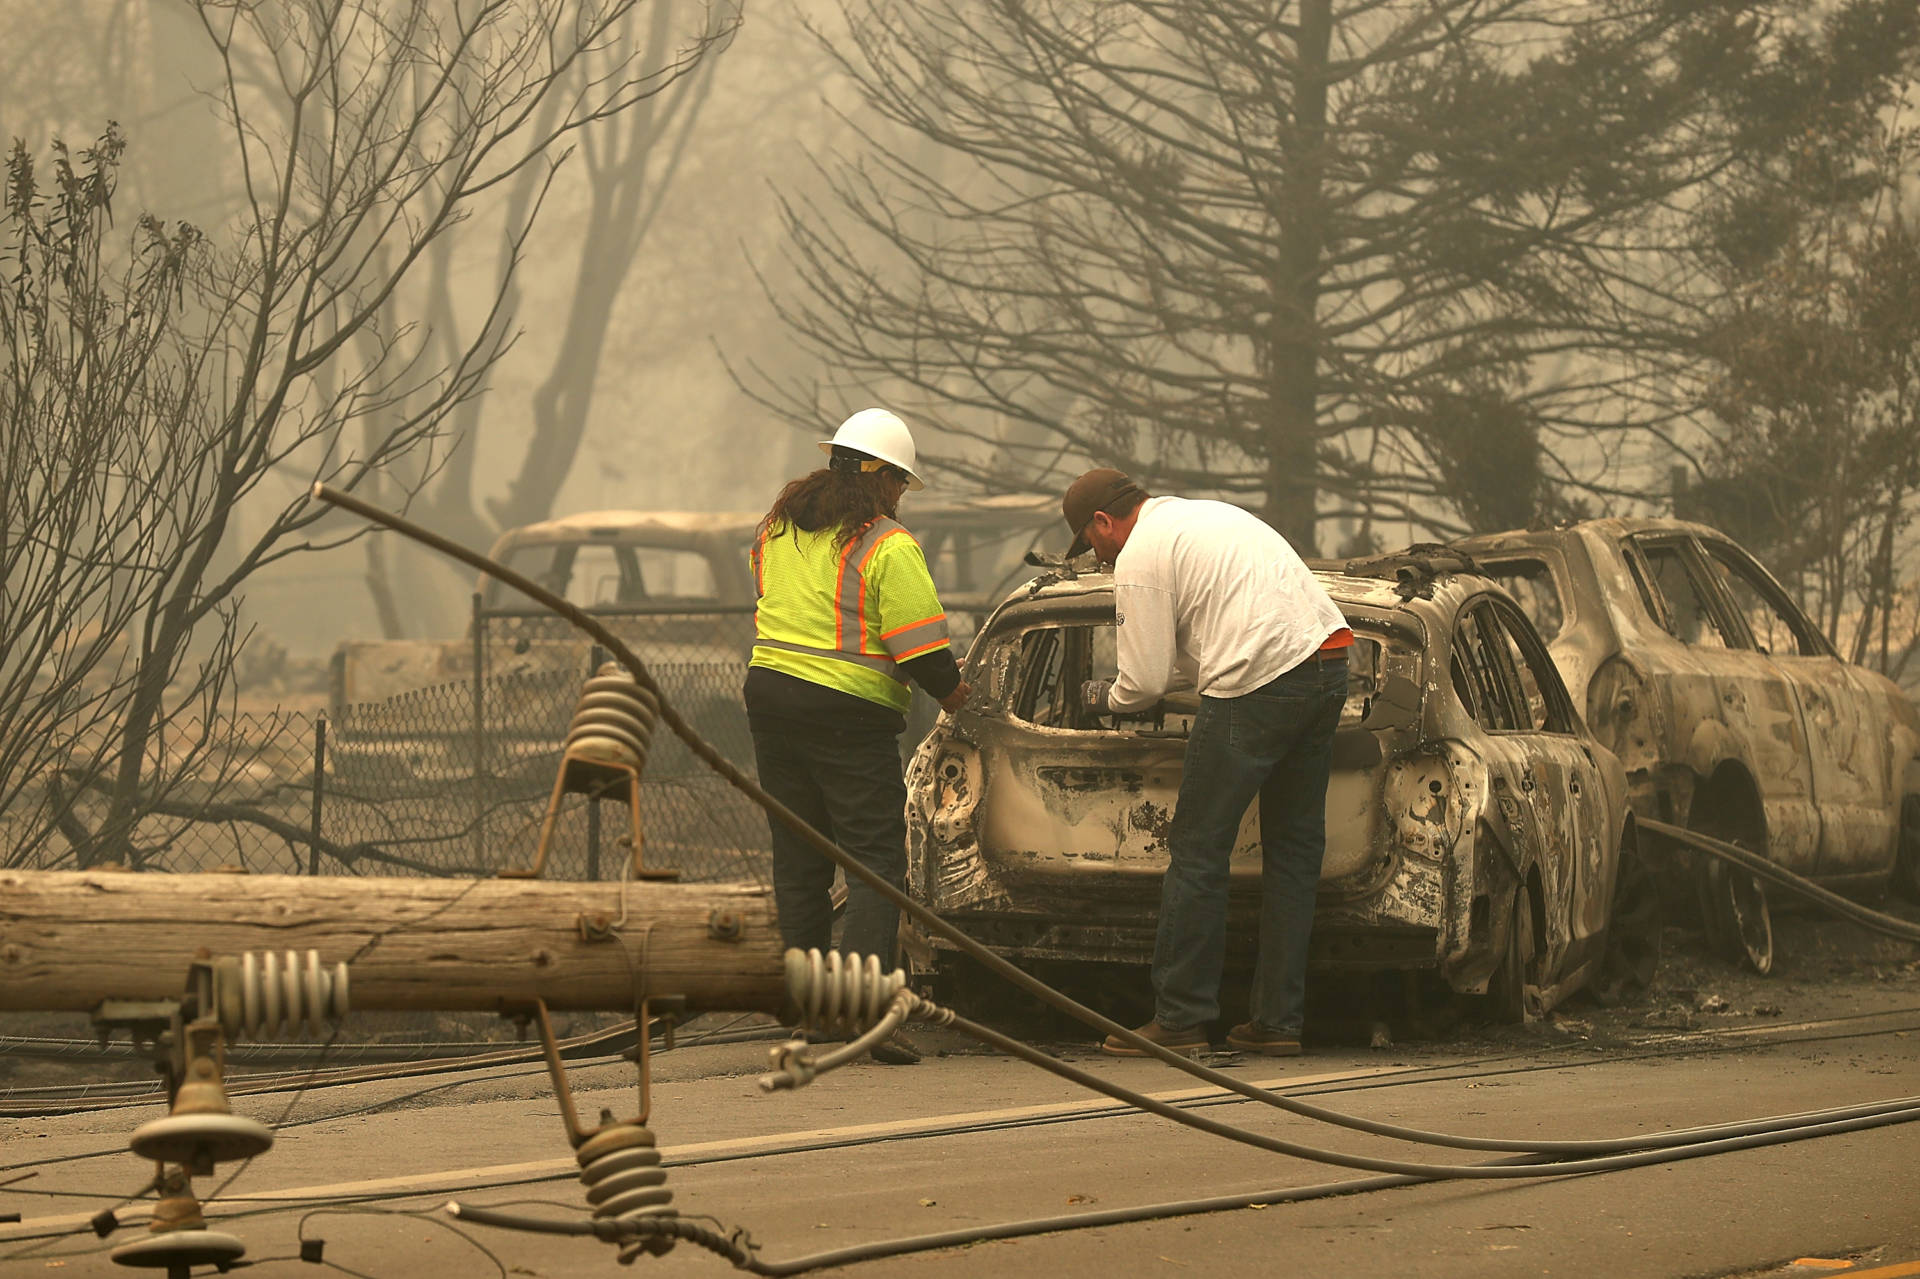 Eric England (R) looks through his friend's car that was burned by the Camp Fire on November 10, 2018, in Paradise, California. Before the filing, PG&amp;E sought to assure the public that it would continue making safety investments in an attempt to avoid future catastrophic wildfires. Justin Sullivan/Getty Images